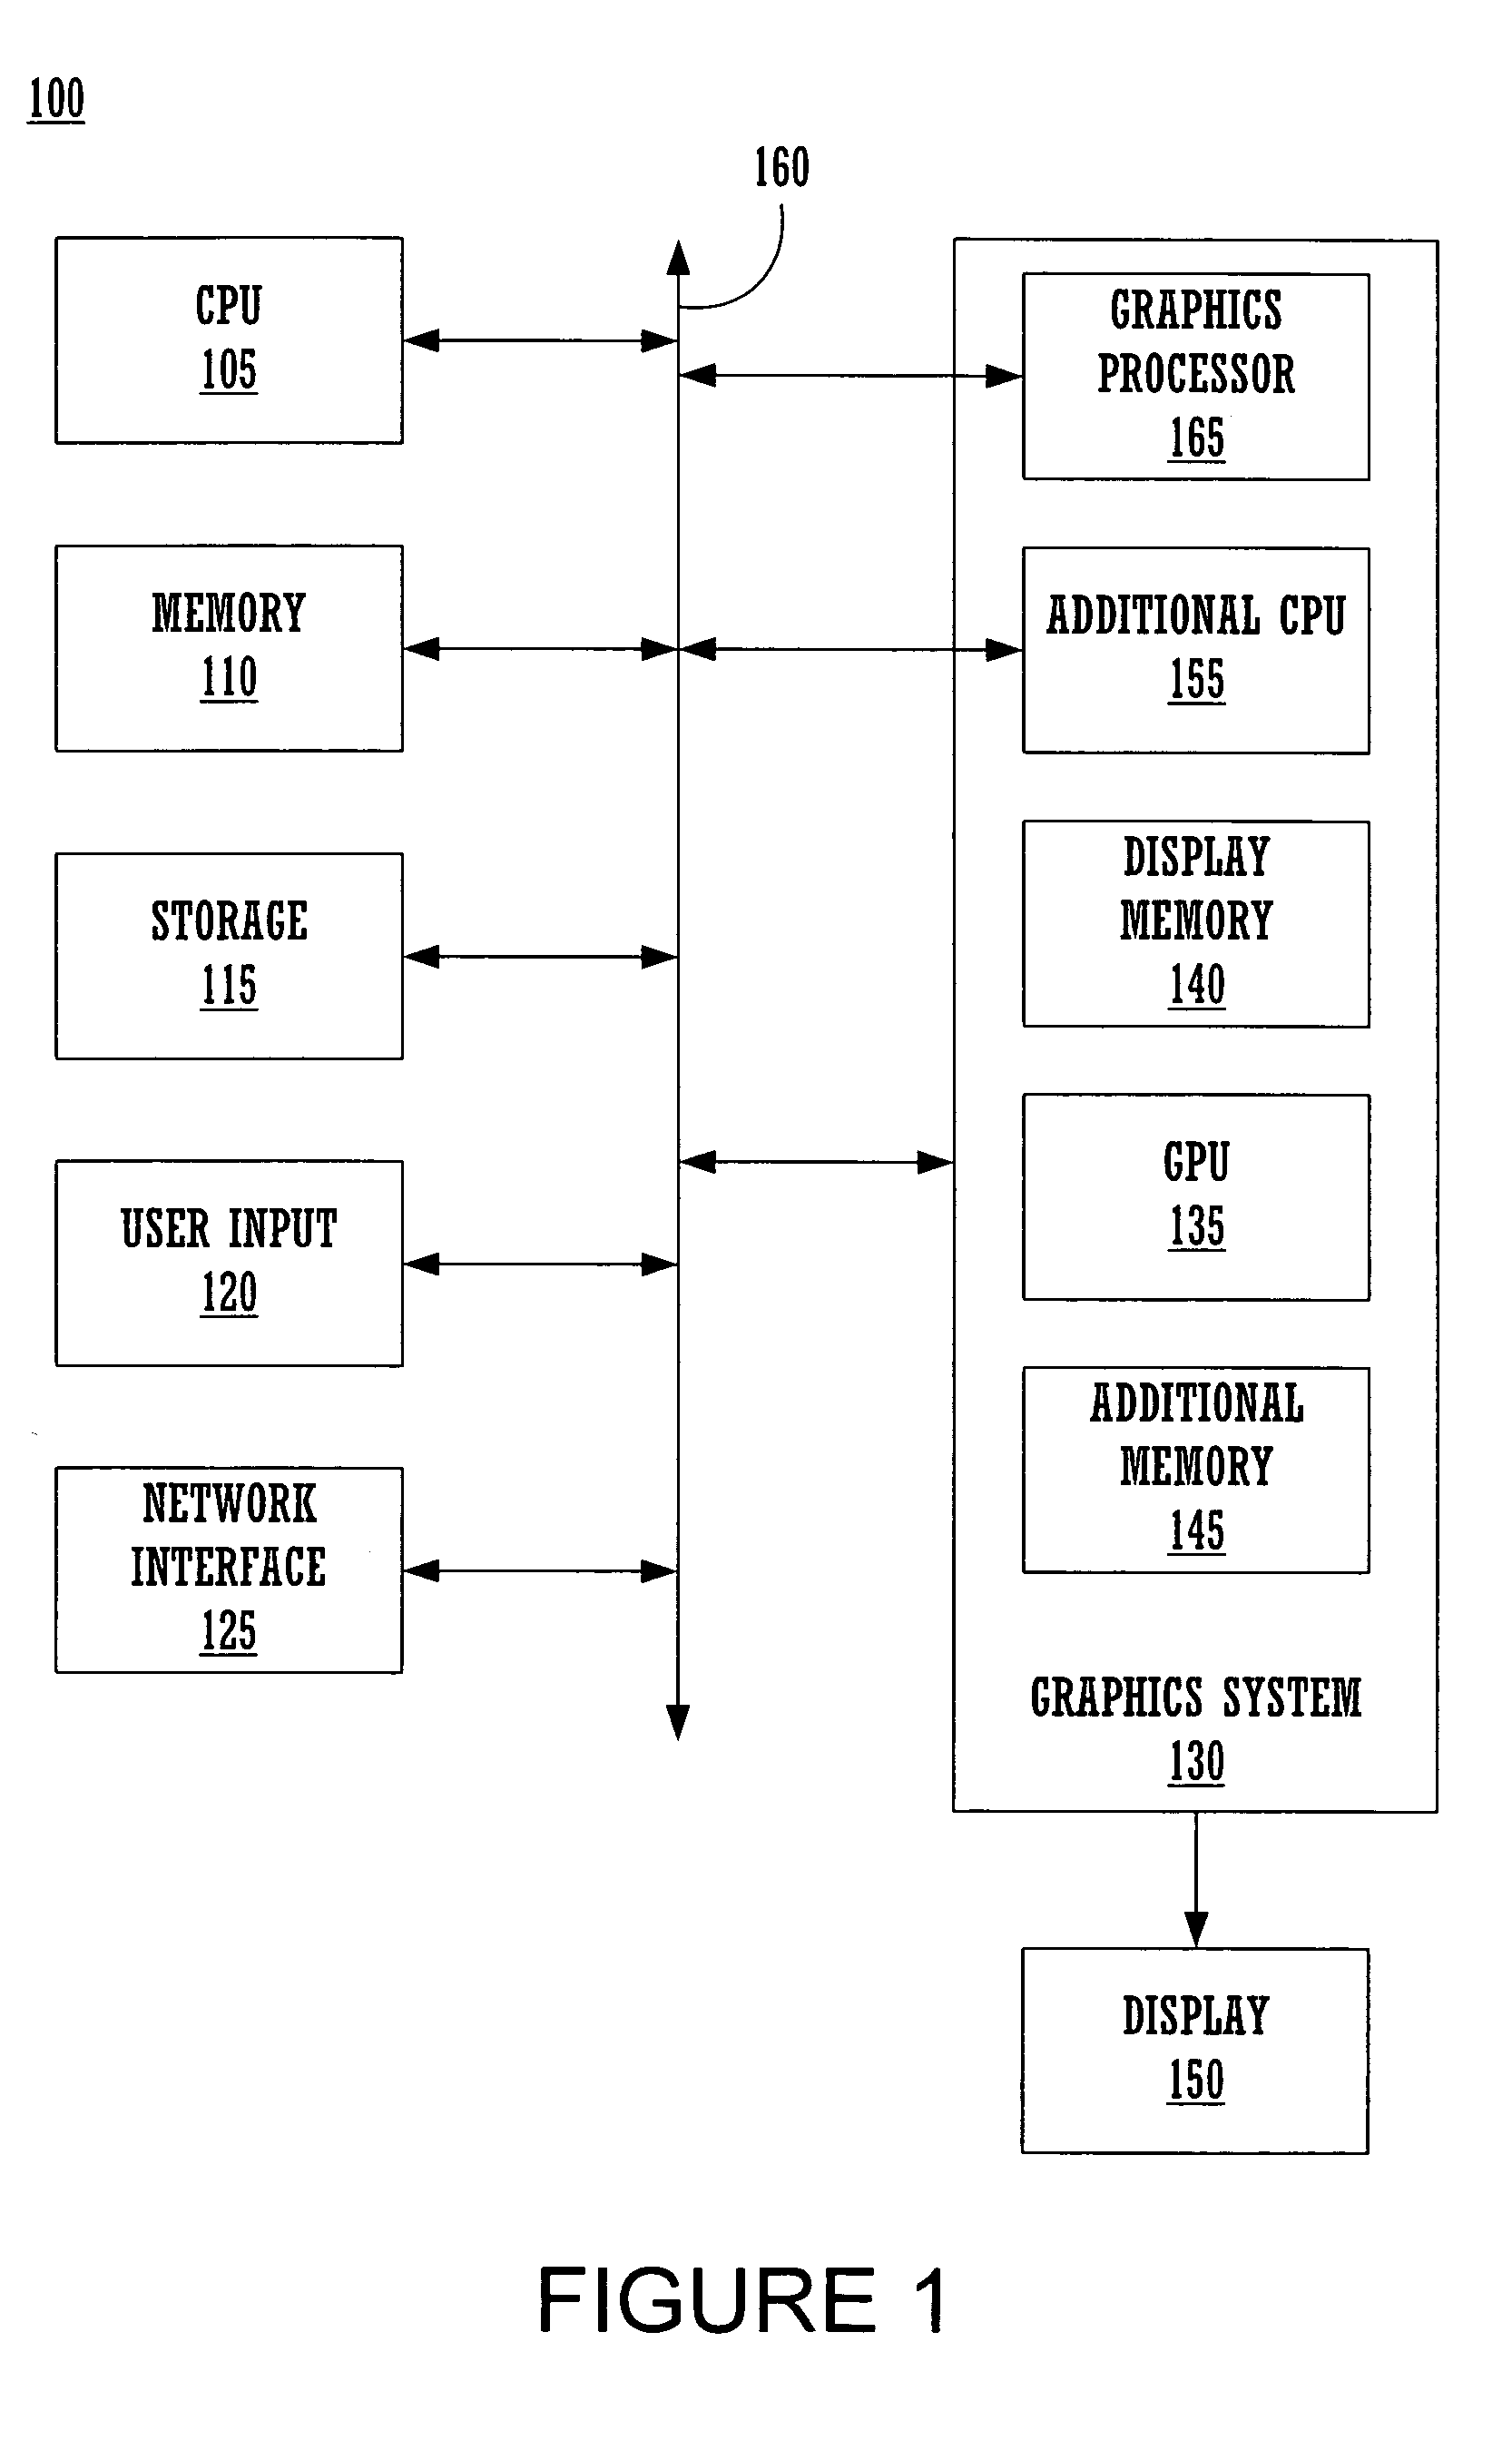 Writing coverage information to a framebuffer in a computer graphics system